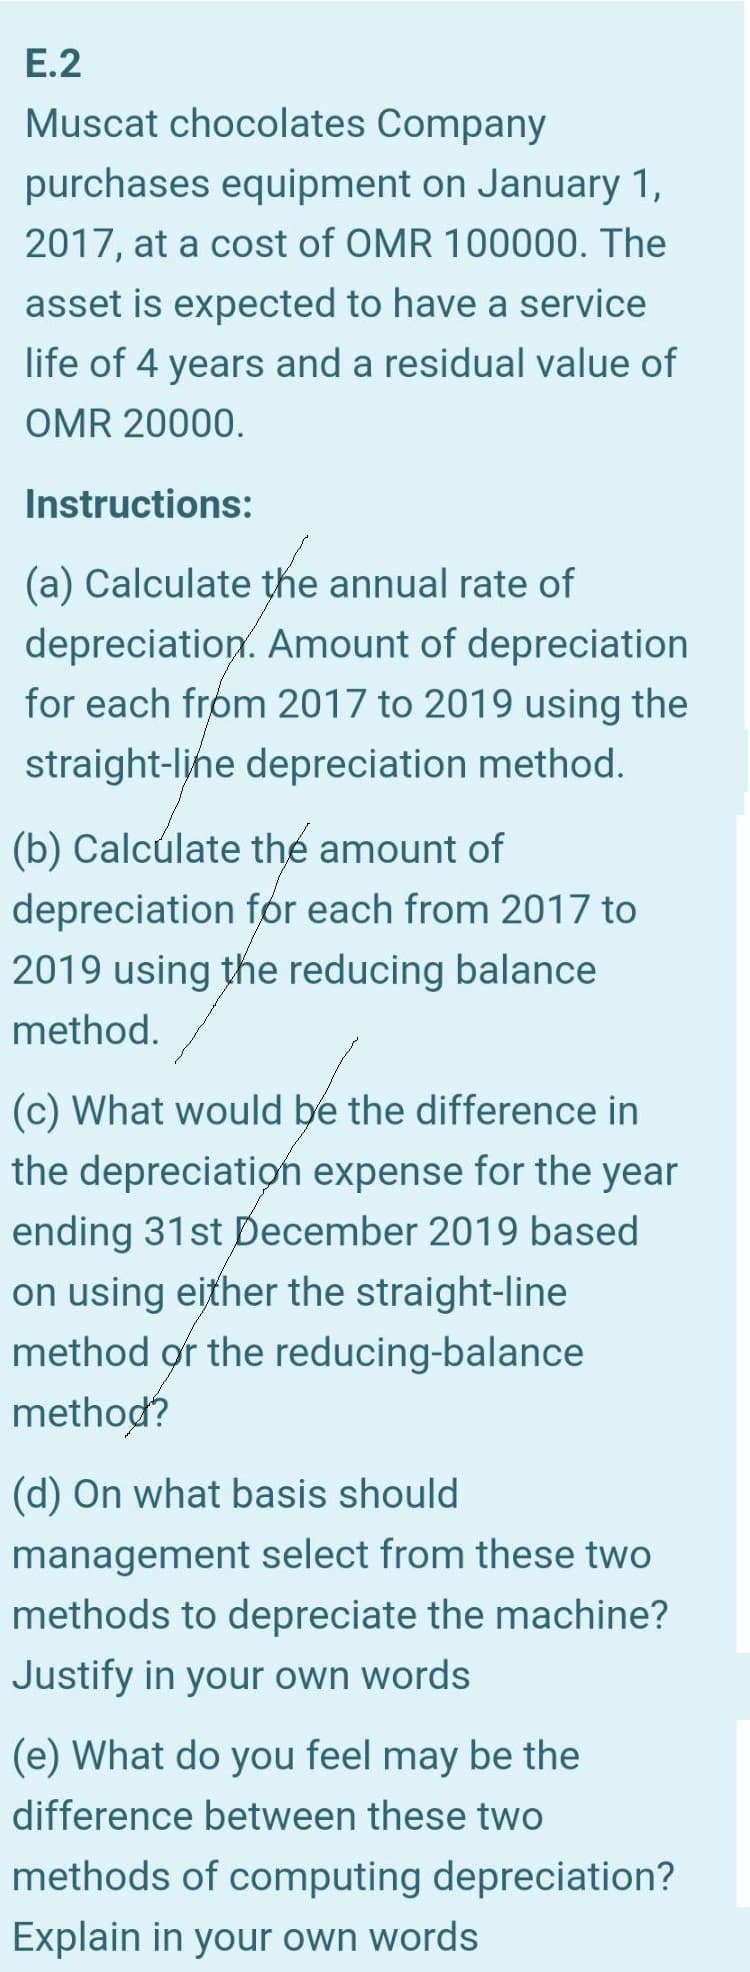 (d) On what basis should
management select from these two
methods to depreciate the machine?
Justify in your own words
(e) What do you feel may be the
difference between these two
methods of computing depreciation?
Explain in your own words
